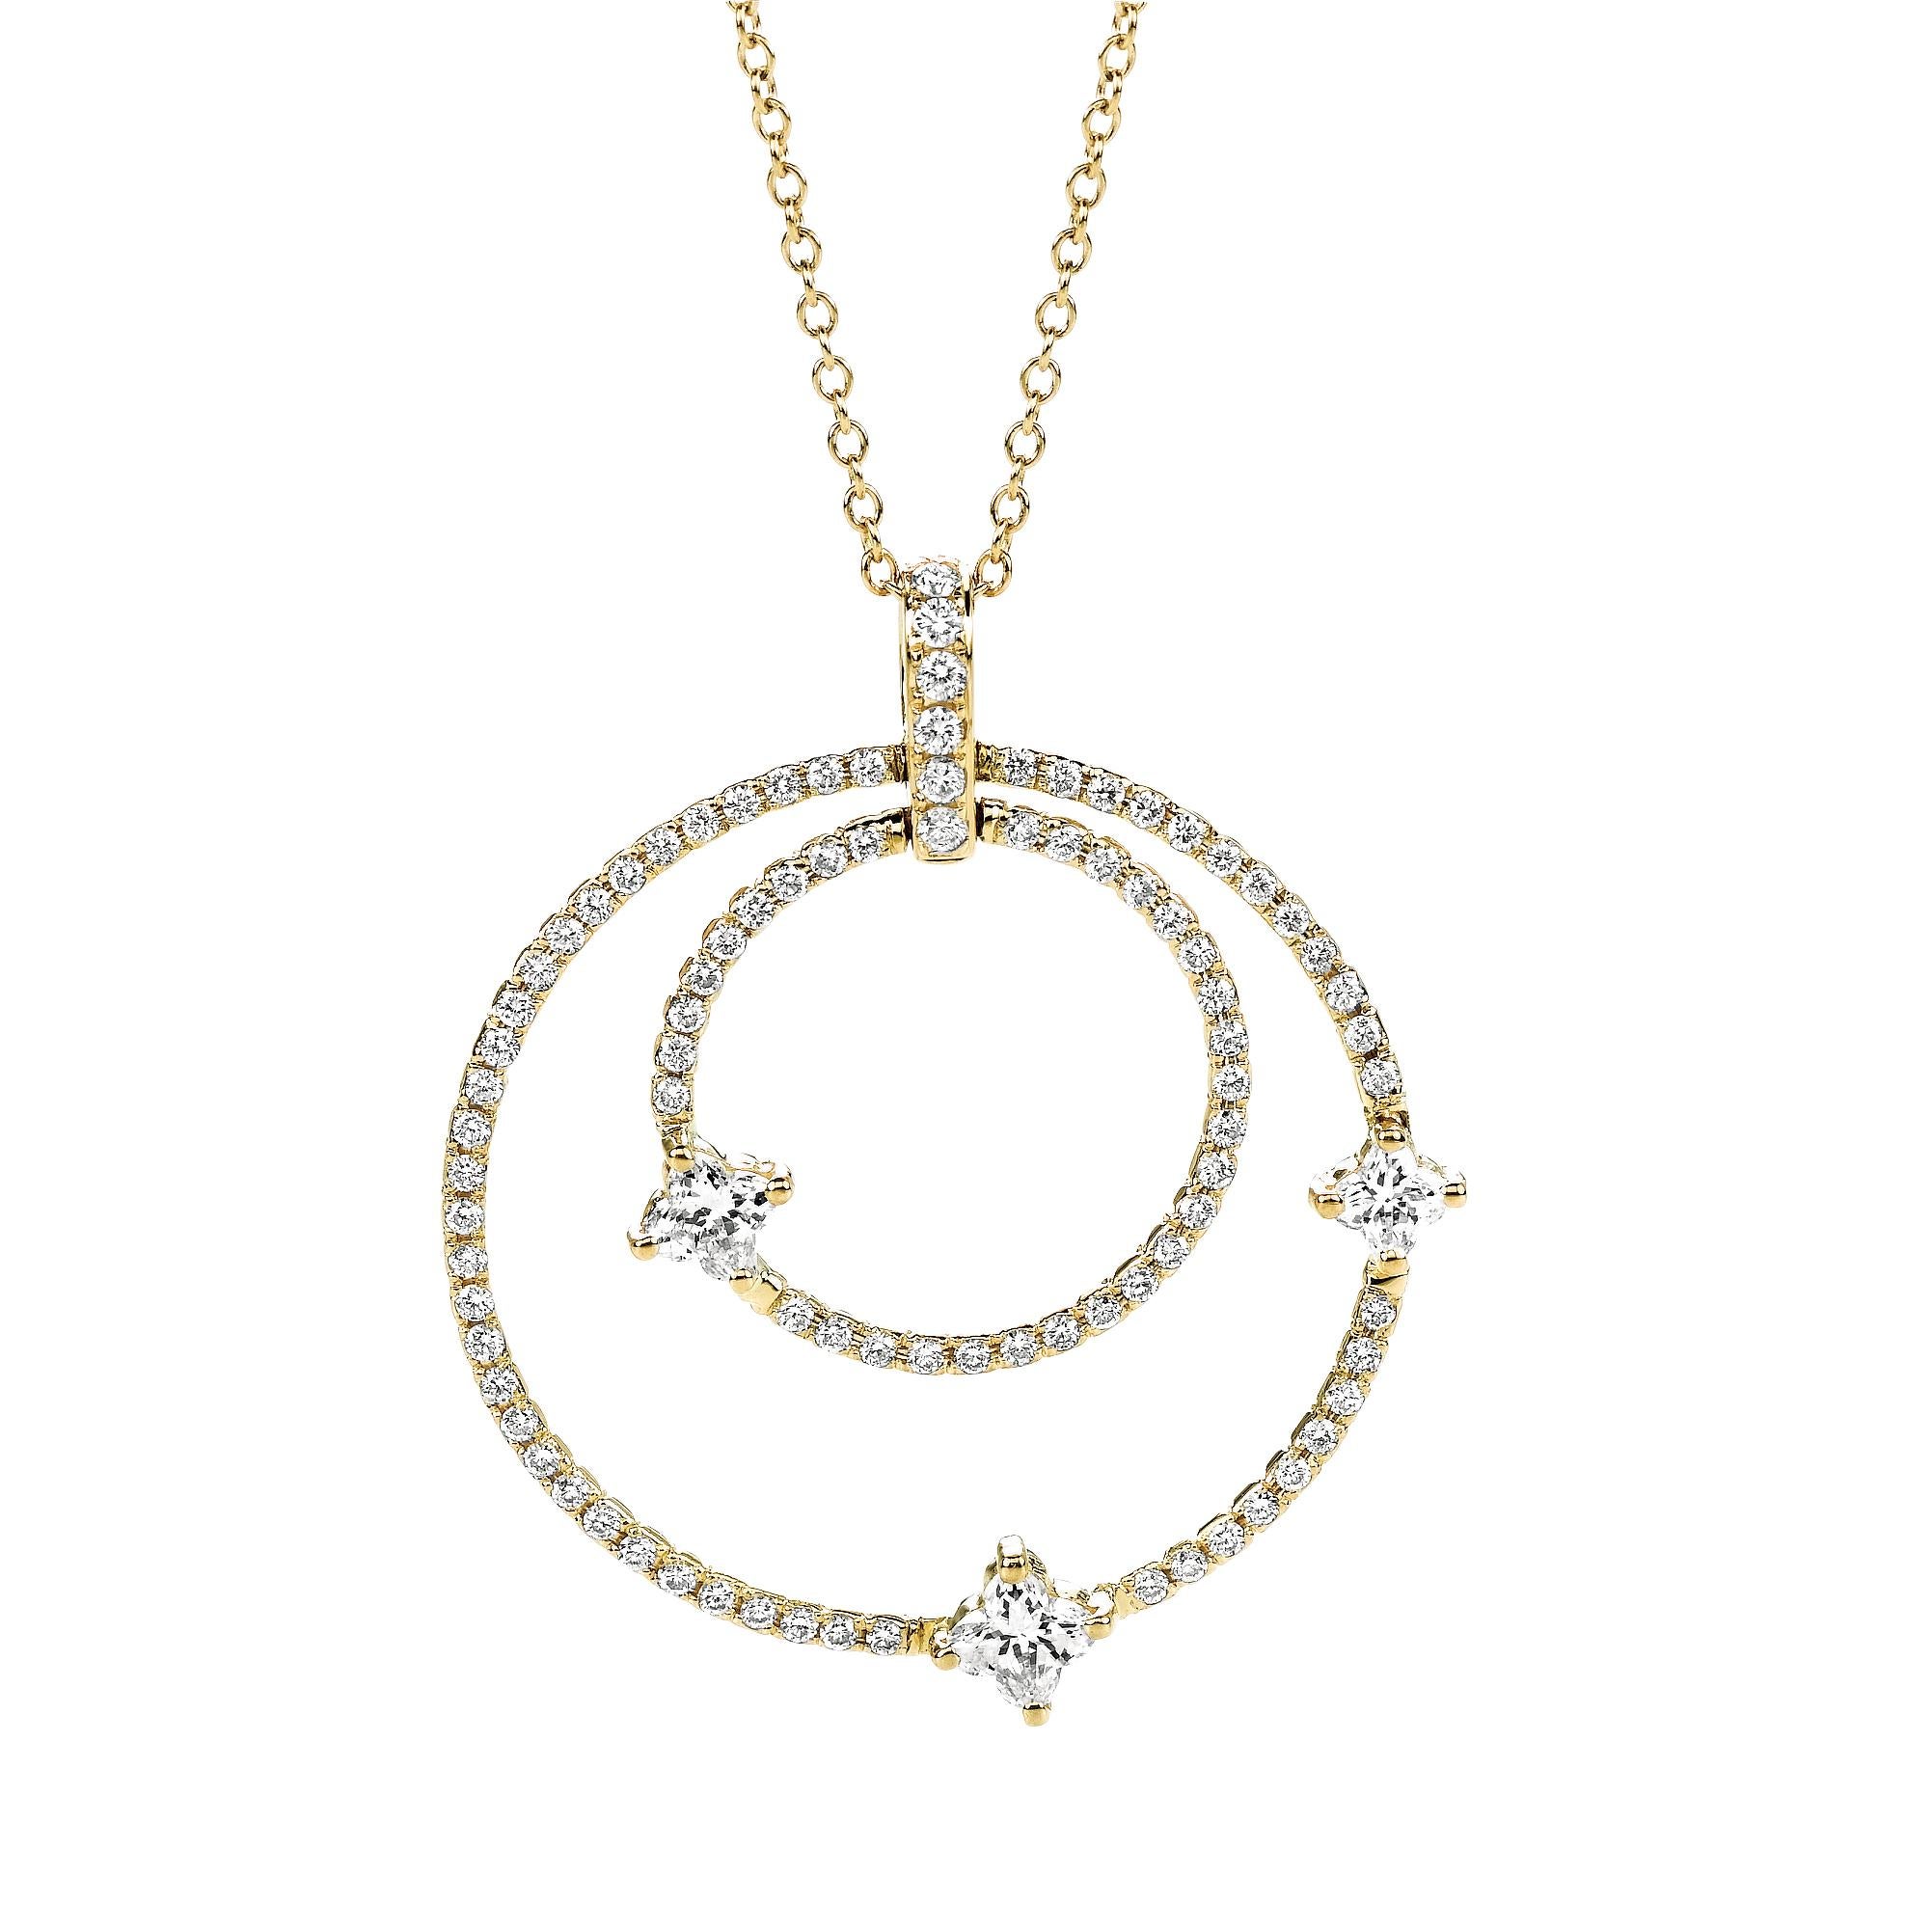 18KT yellow gold diamond round and flower necklace. 3   flower shape diamond H color VS SI clarity  0.60 cts . additional 0.54 ct round diamond accent .   17 inch with a link to shorten to 16 inch . Diameter of circle pendant 1 inch , 3 cm 